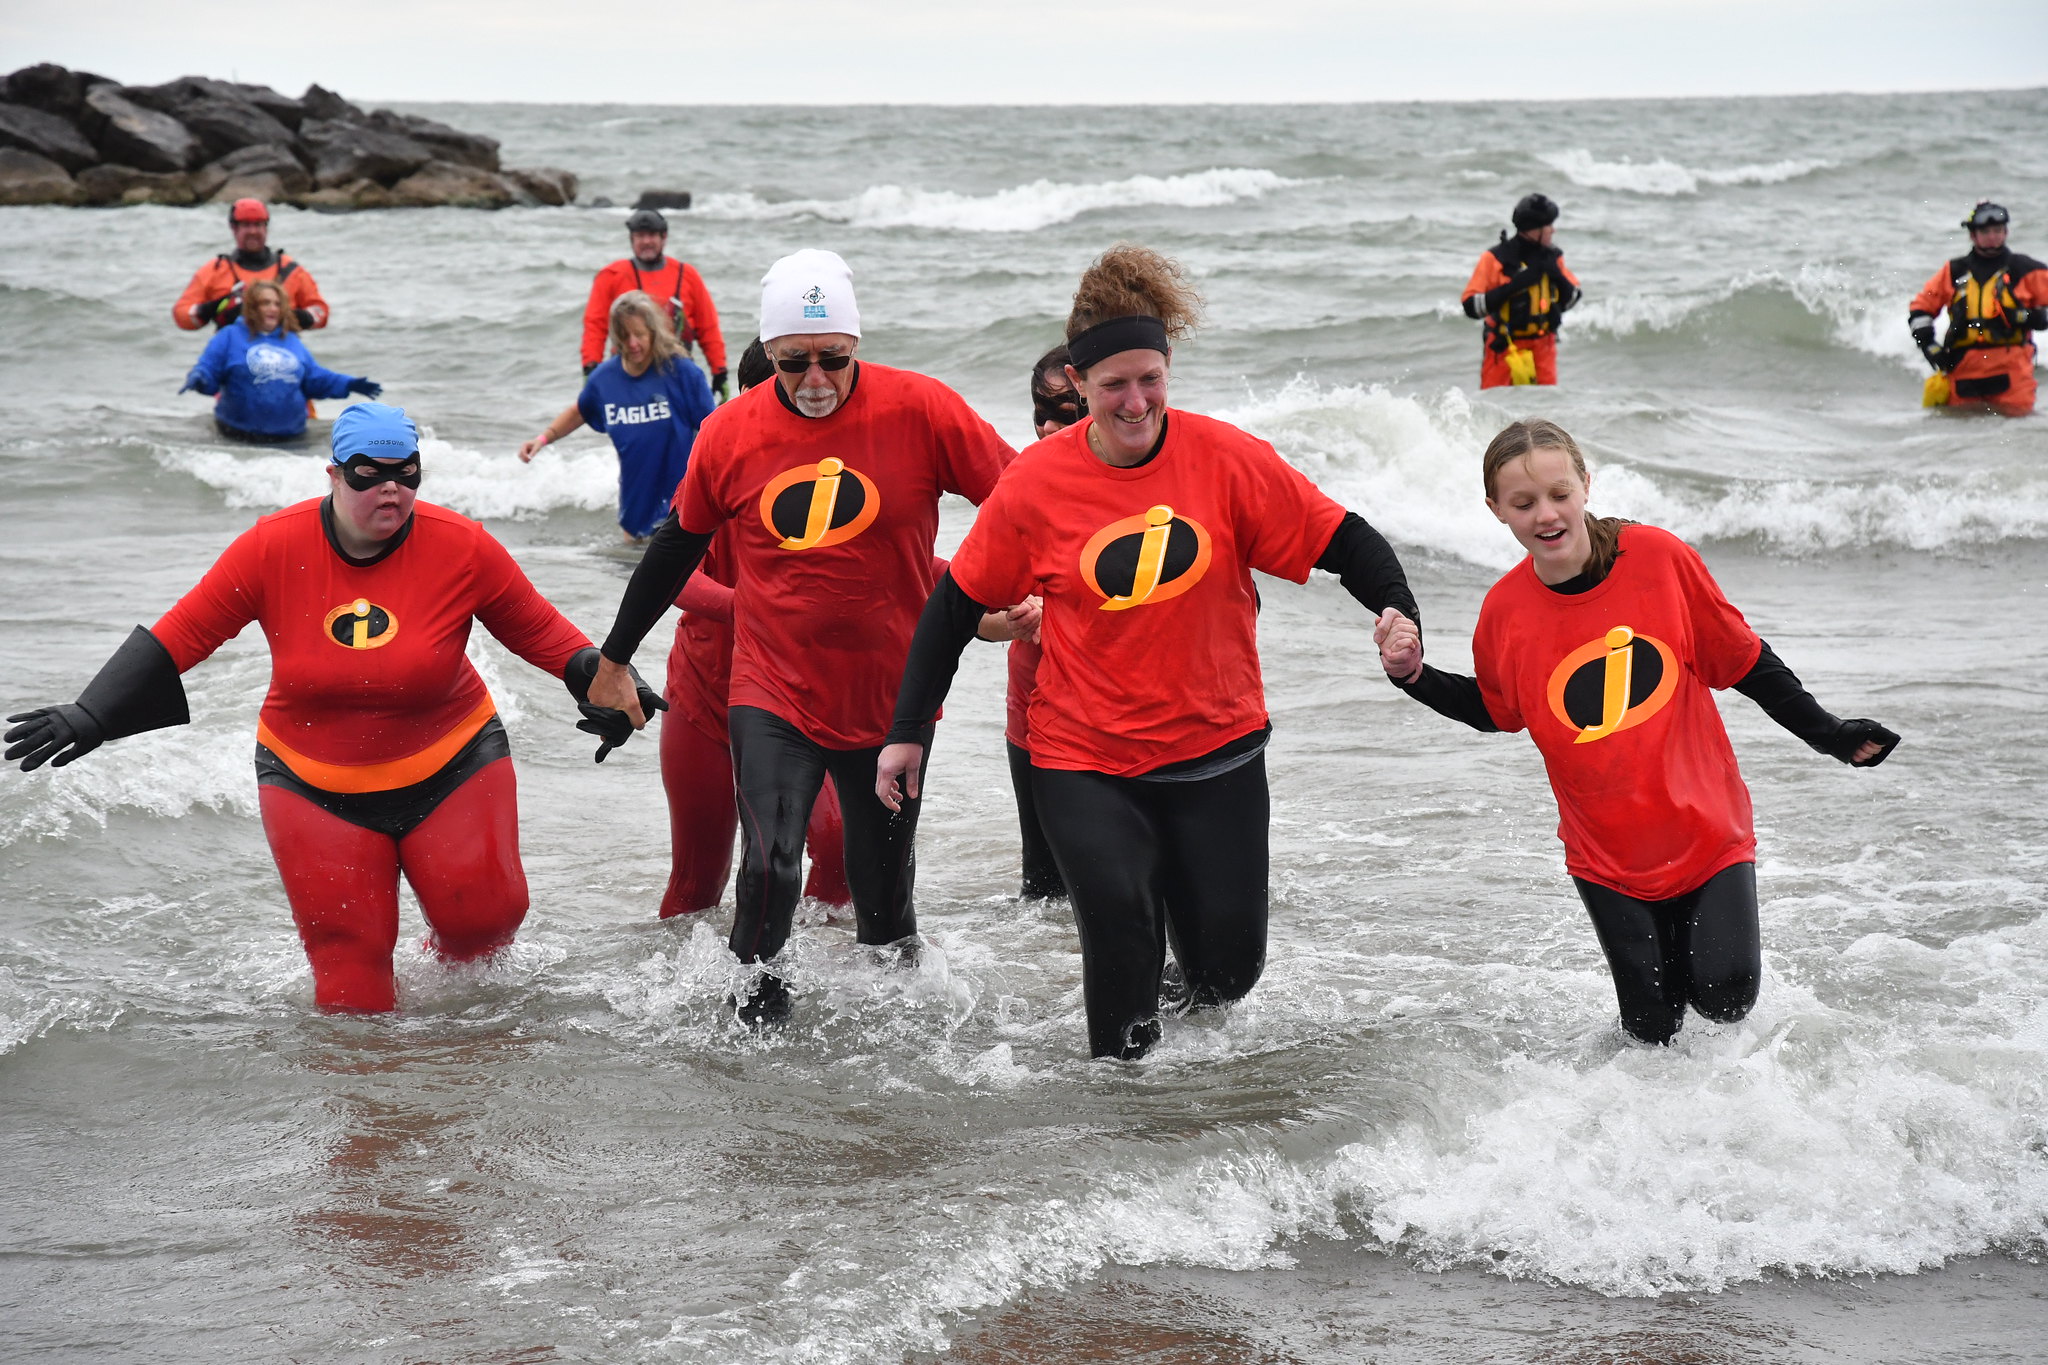 Polar Plungers dressed in 